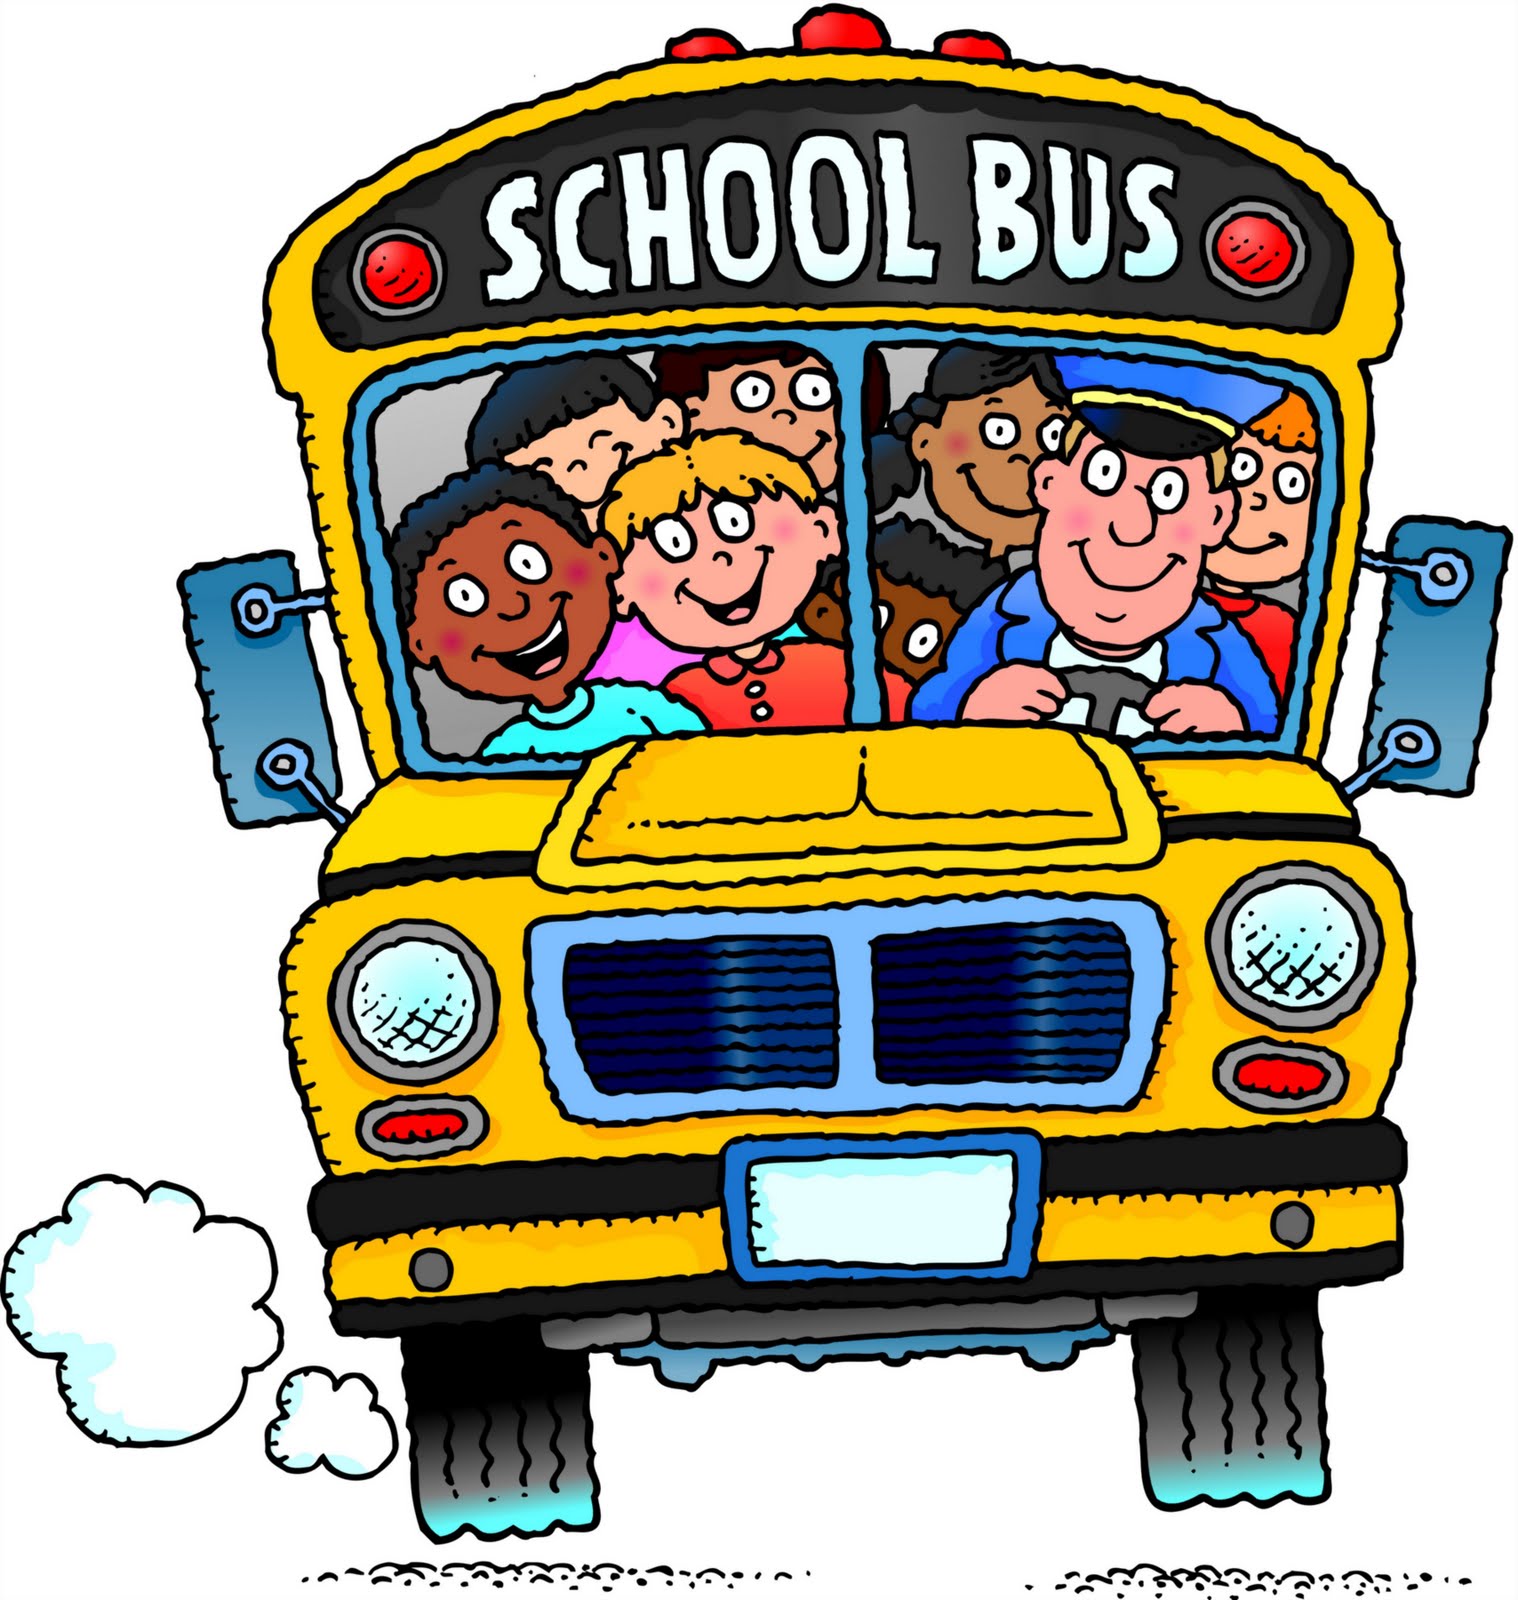 Related Pictures School Bus Cartoon Index Of Car Pictures